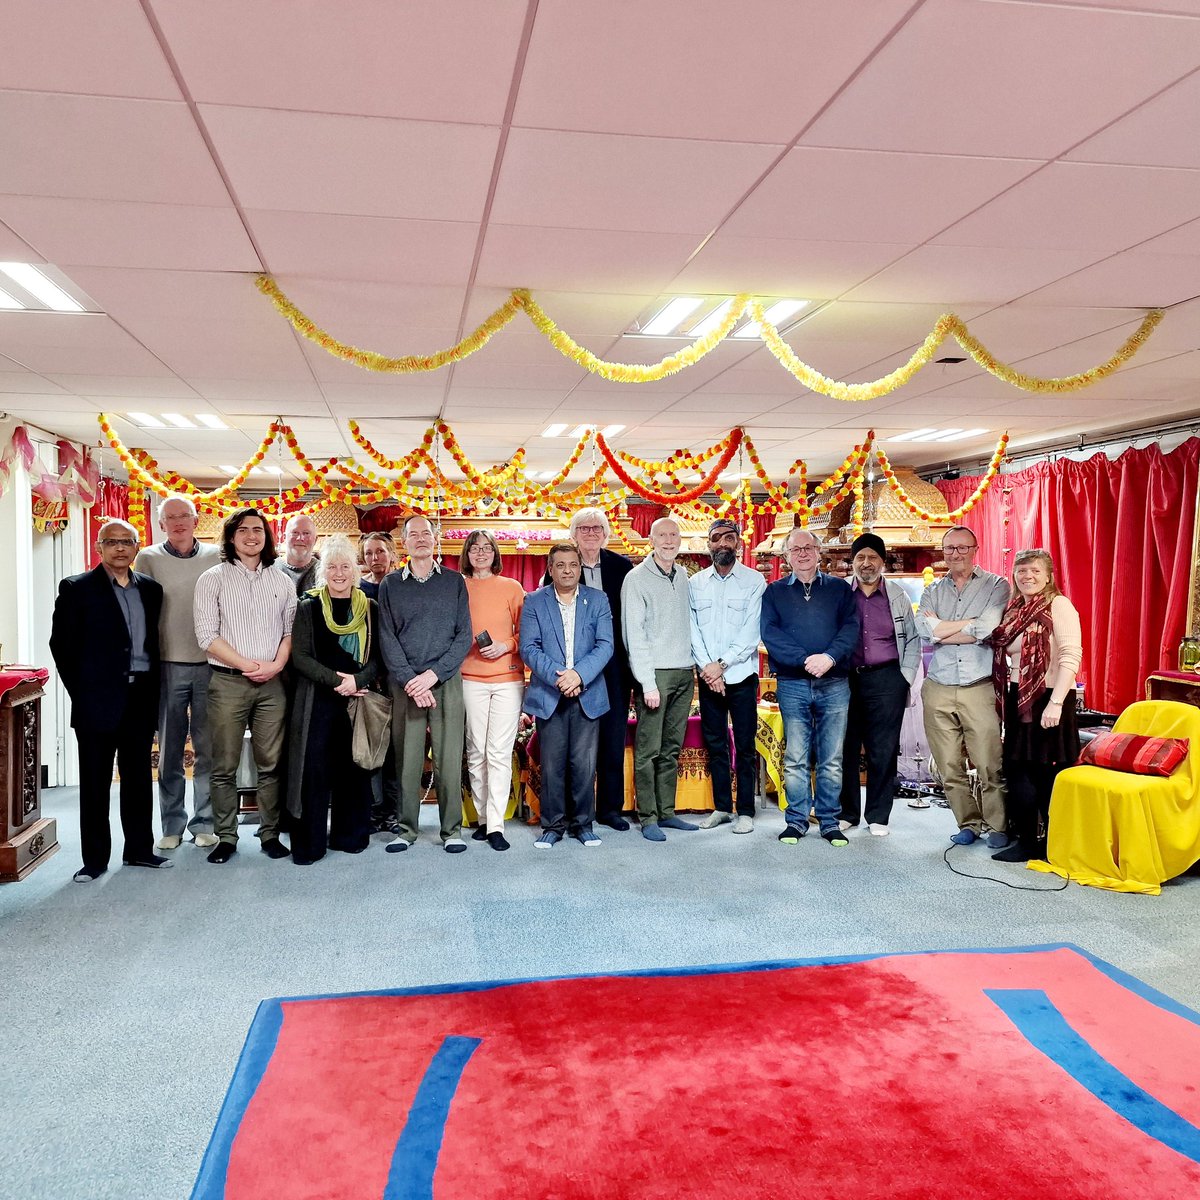 Today, we hosted @SwinInterfaith at our @SwindonTemple for a tour, chit-chat & meal. #engagement #opendoors #openminds is the way forward to build #peace #tolerance #mutualrespect in the society and the world. @IFNetUK #Swindon #Wiltshire